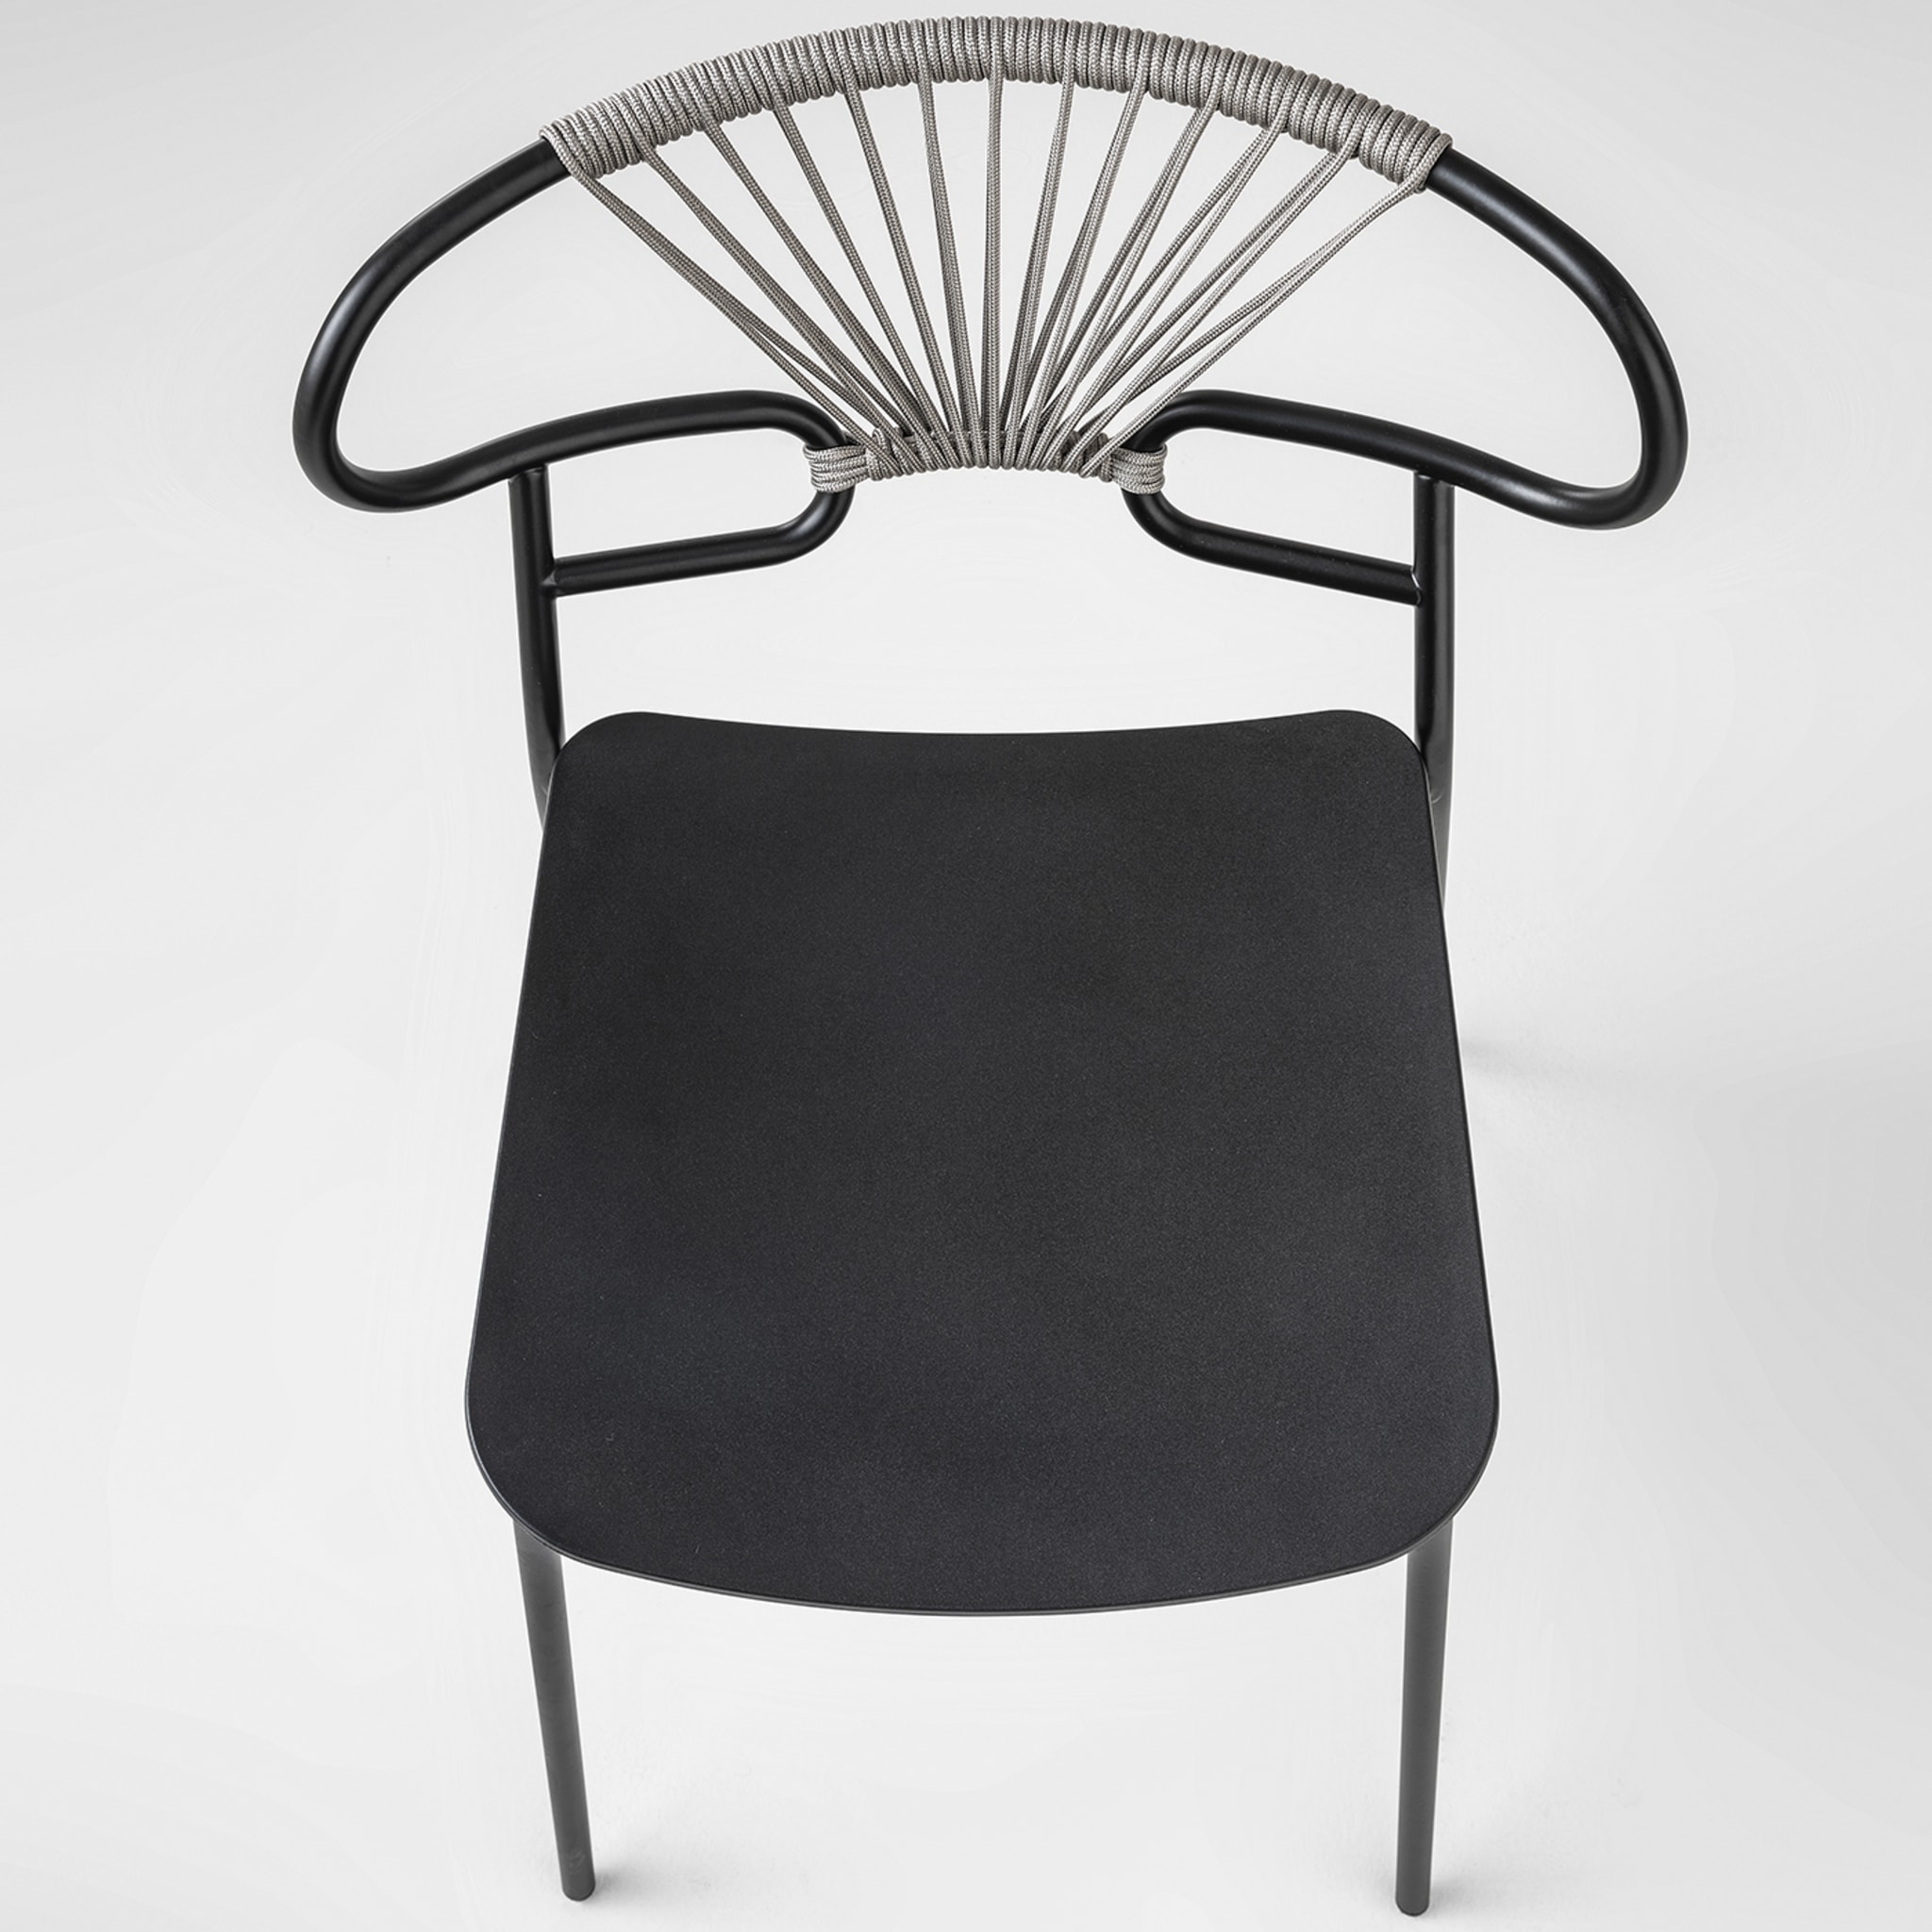 Genoa Chair with Gray Rope #2 by Cesare Ehr - Alternative view 1